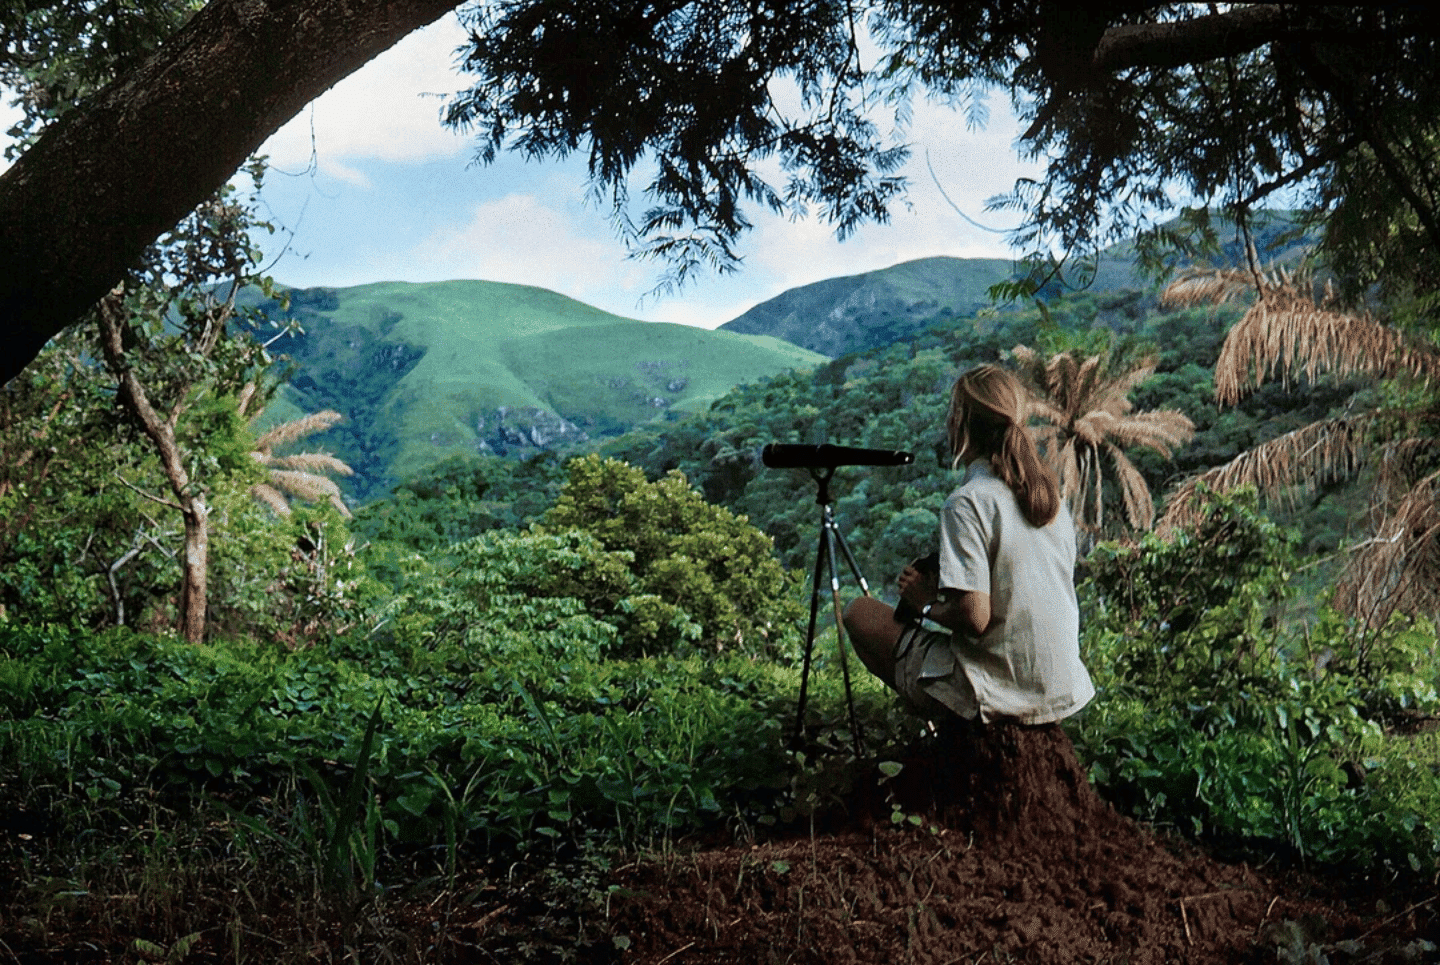 Jane Goodall crouching in a brilliantly green jungle with a small telescope on a tripod 